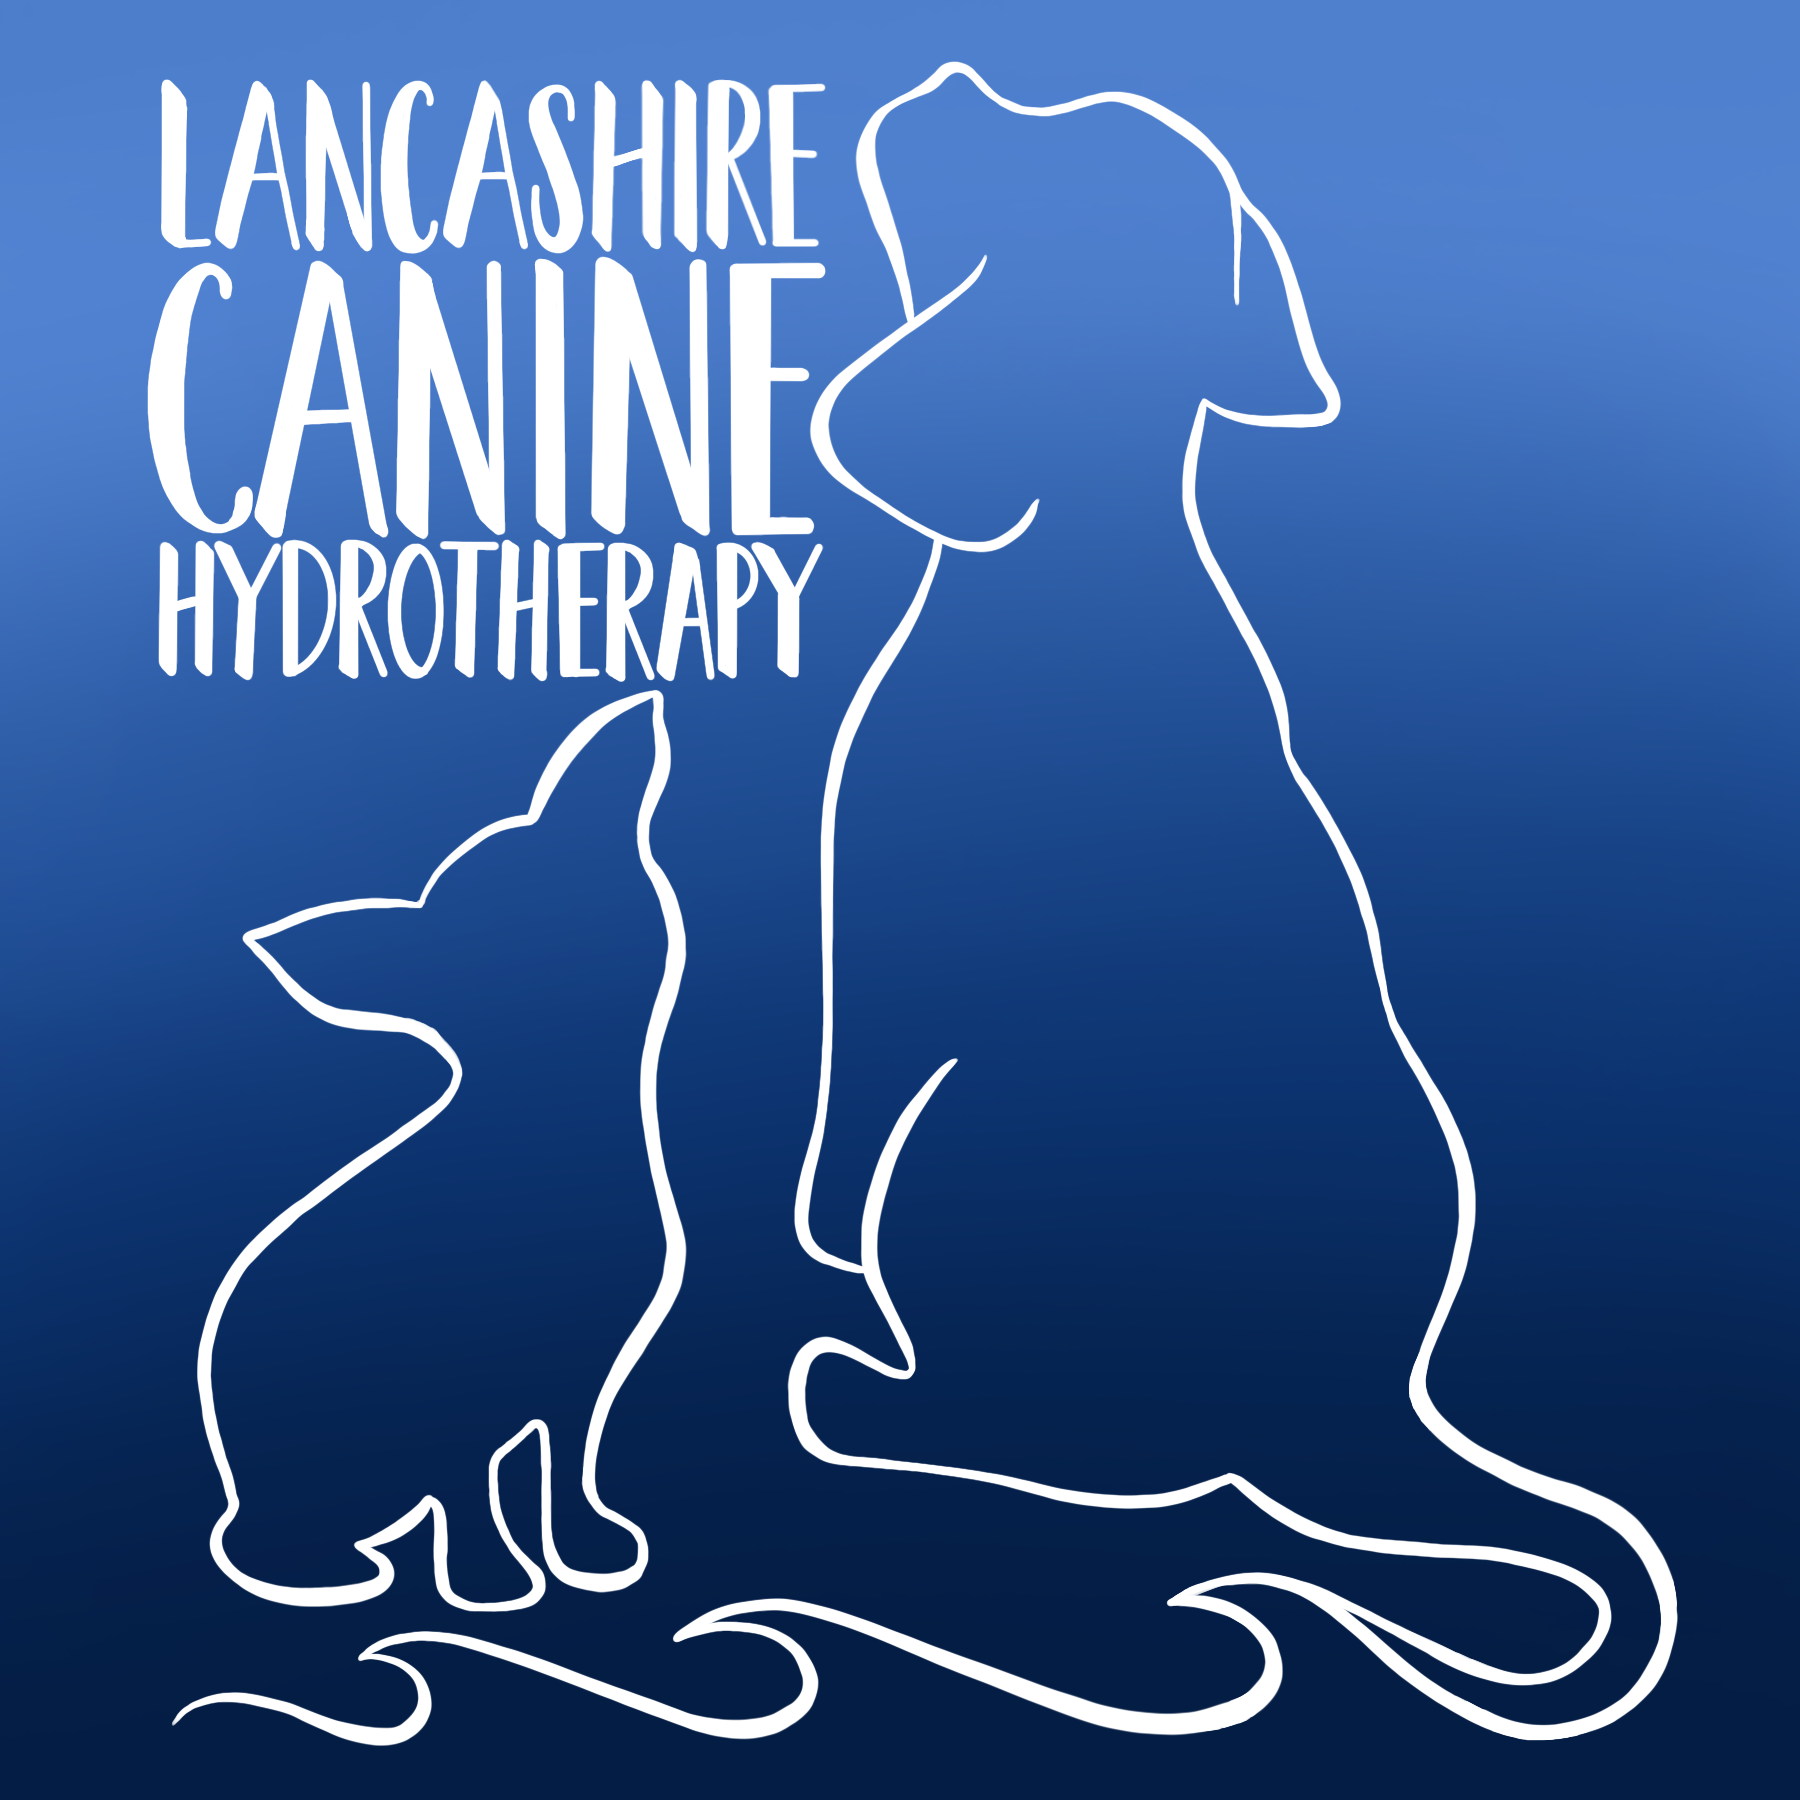 Lancashire Canine Hydrotherapy